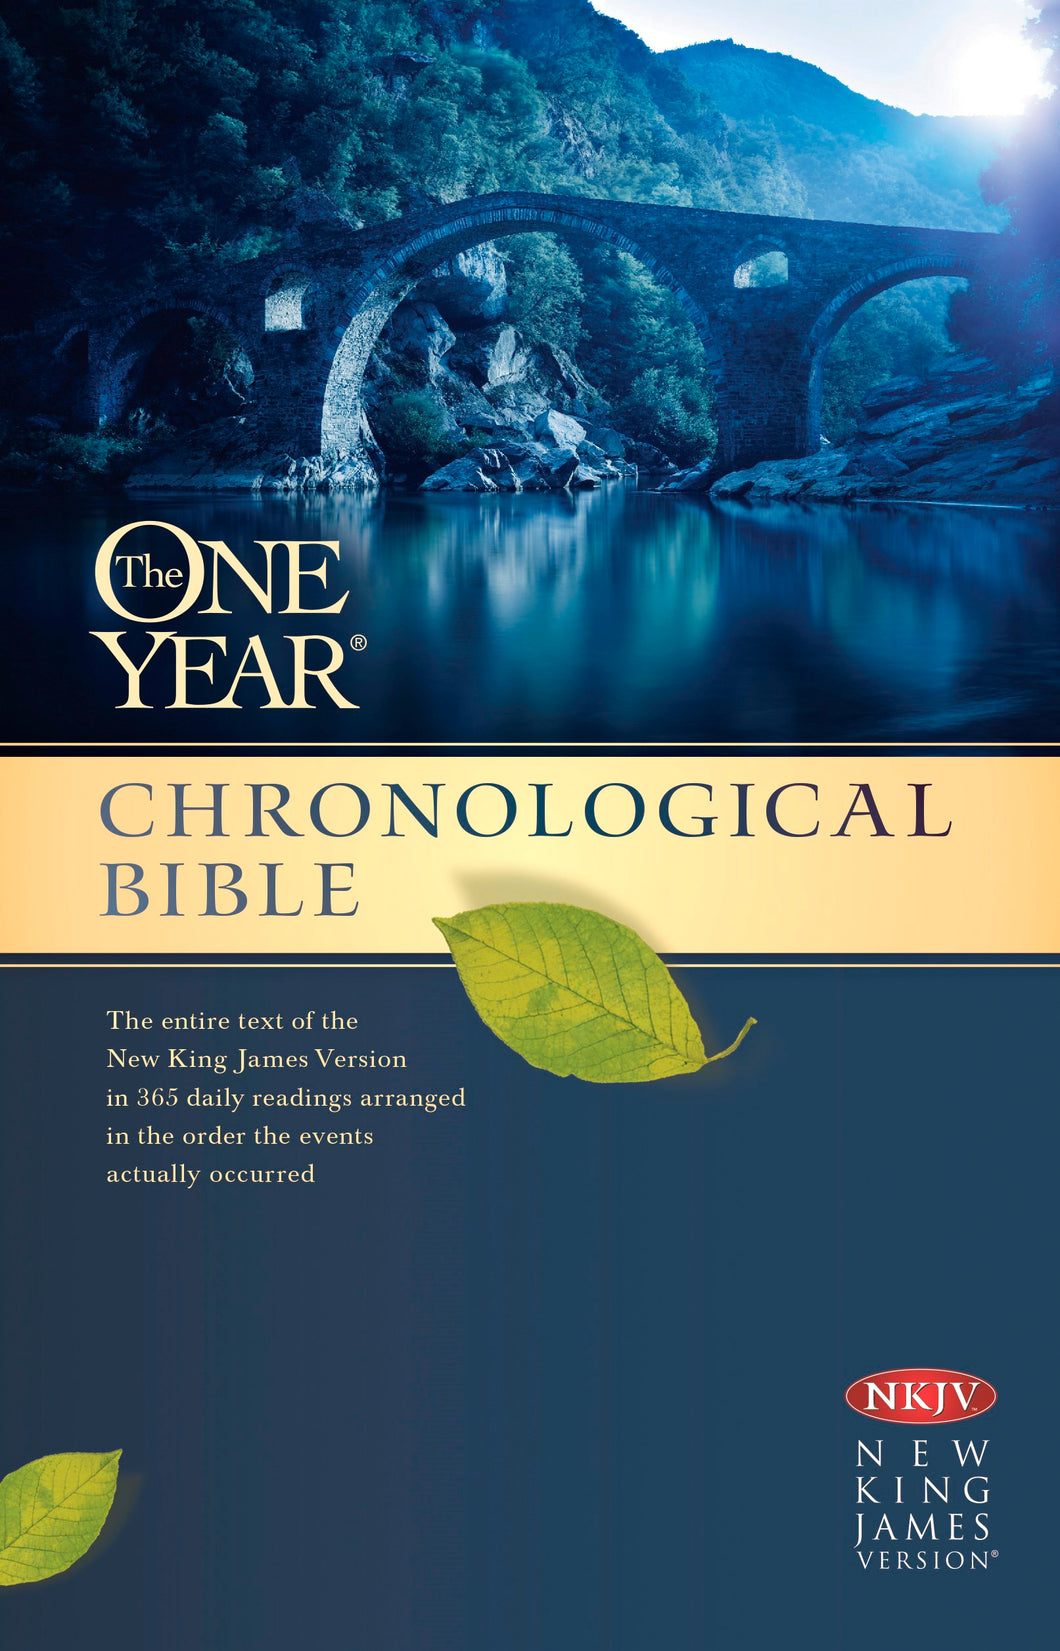 NKJV The One Year Chronological Bible-Softcover